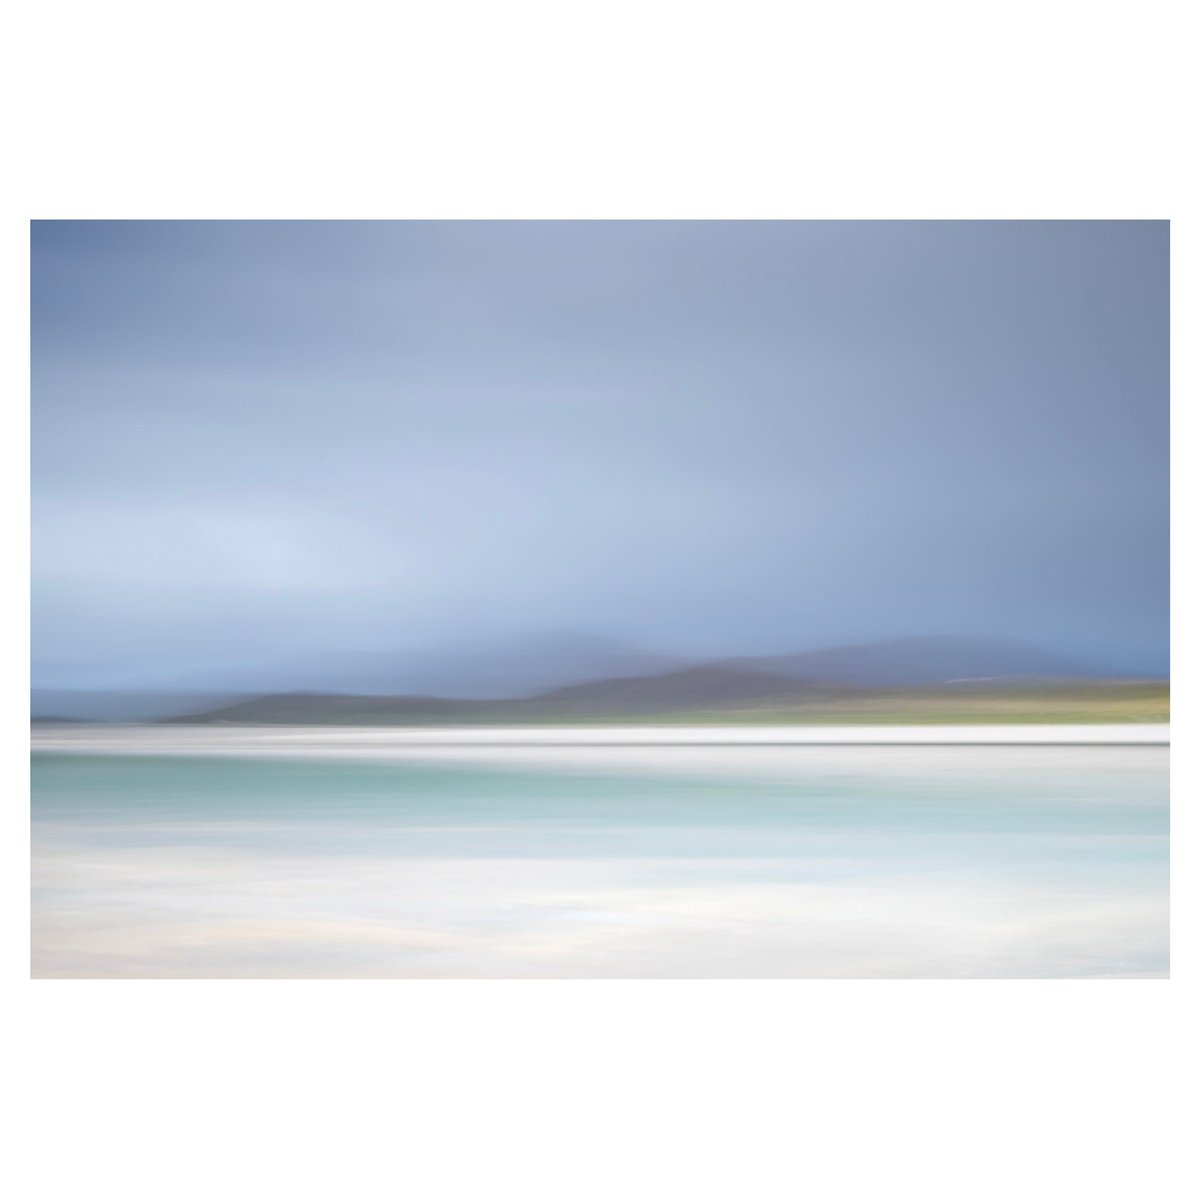 I can’t quite believe it’s June, still wondering where this year has gone, but it does mean that it’s not long now until I return to the beautiful Isle of Harris. For now, here is one from last year. An iconic viewpoint captured from Seilibost. #icm #icmphotography #scotland